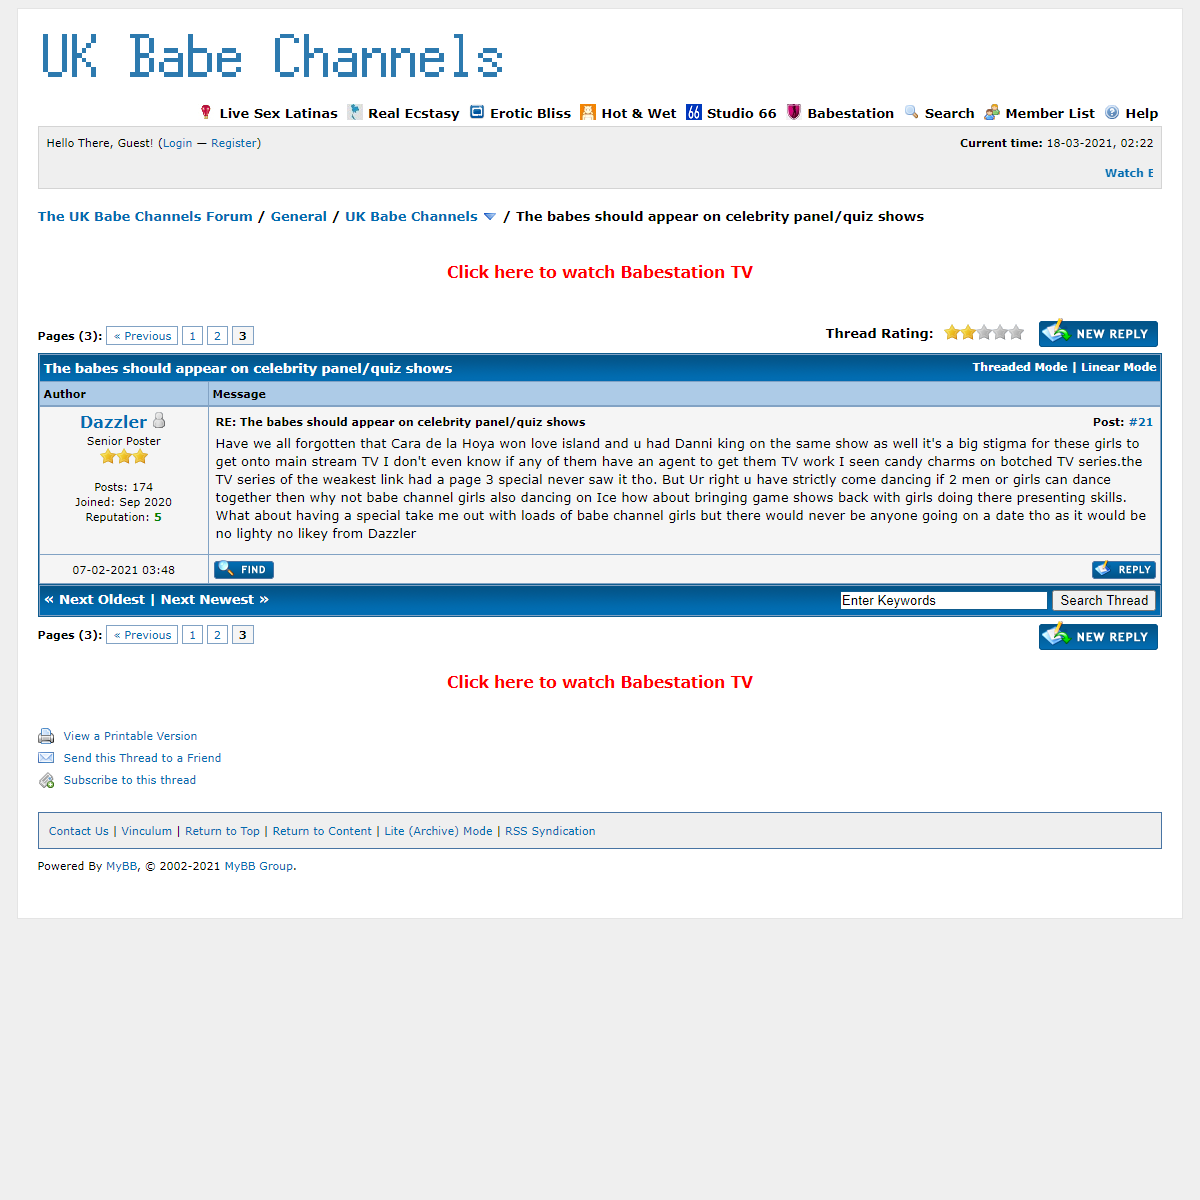 A complete backup of https://www.babeshows.co.uk/showthread.php?tid=82233&page=3